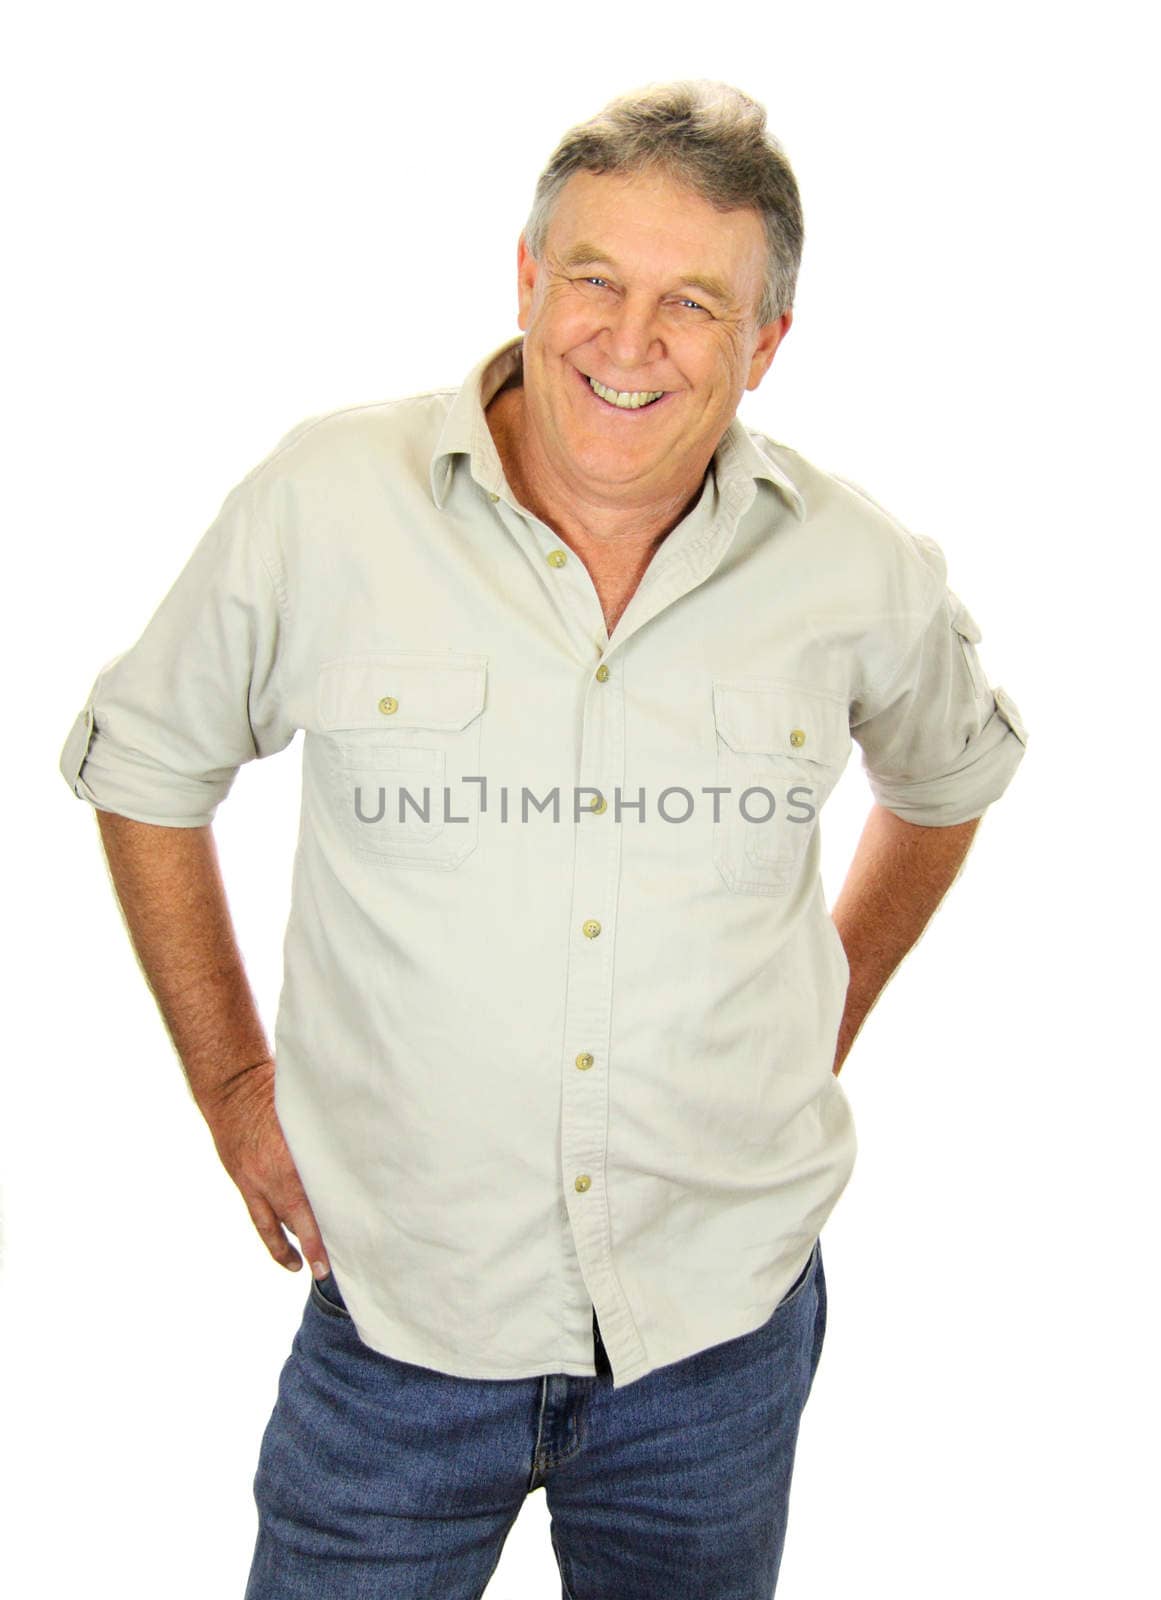 Casual middle aged man standing and smiling.